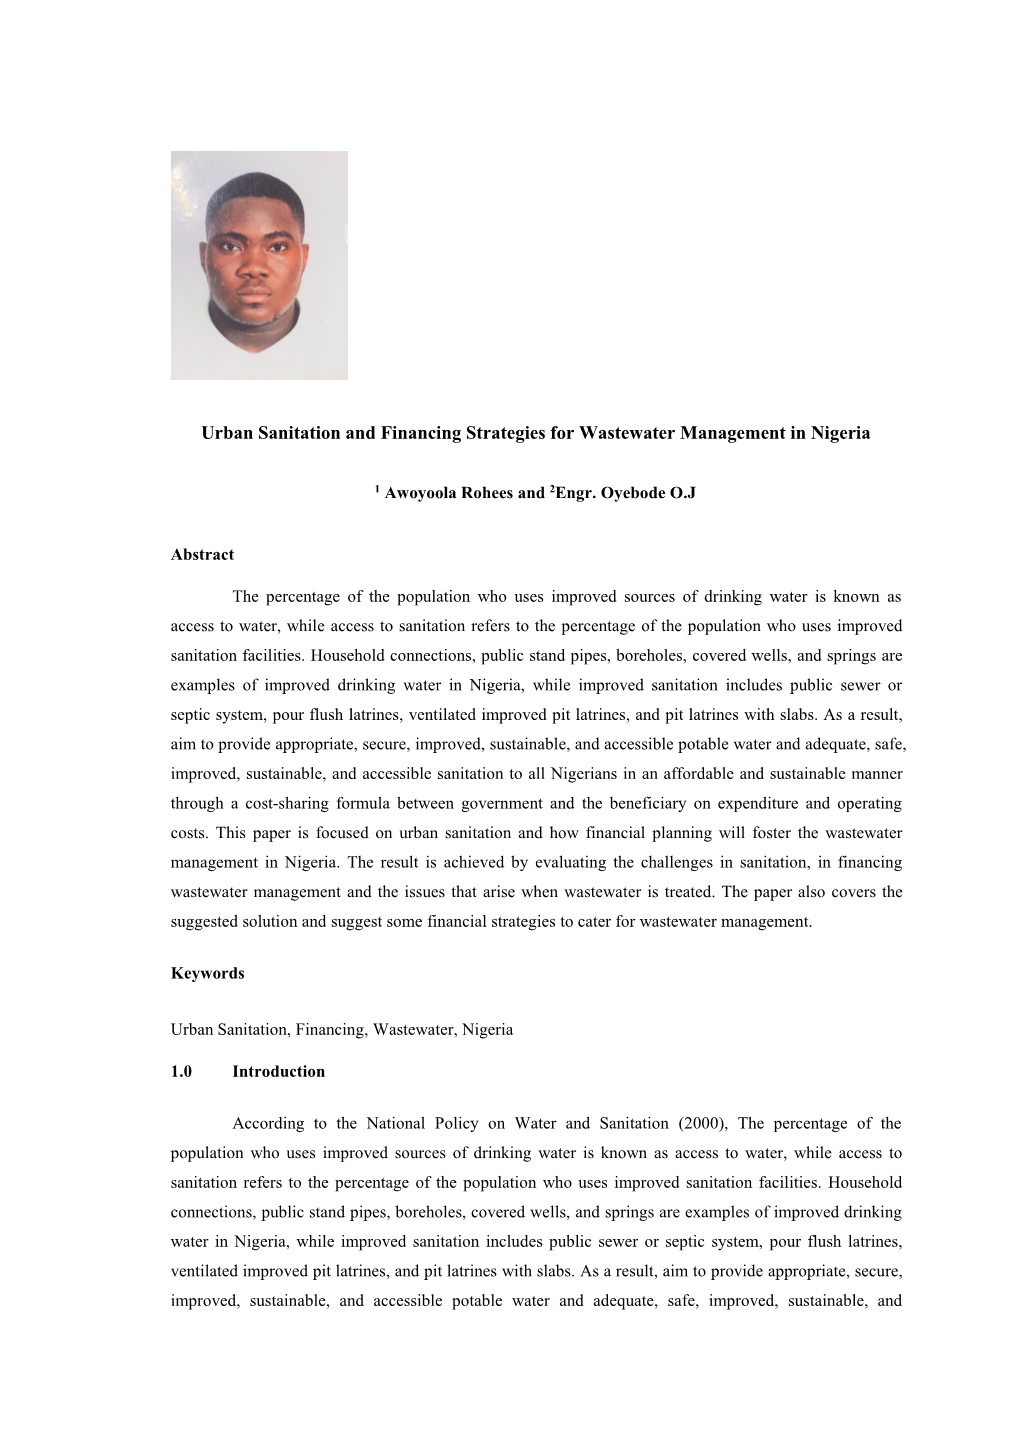 Urban Sanitation and Financing Strategies for Wastewater Management in Nigeria